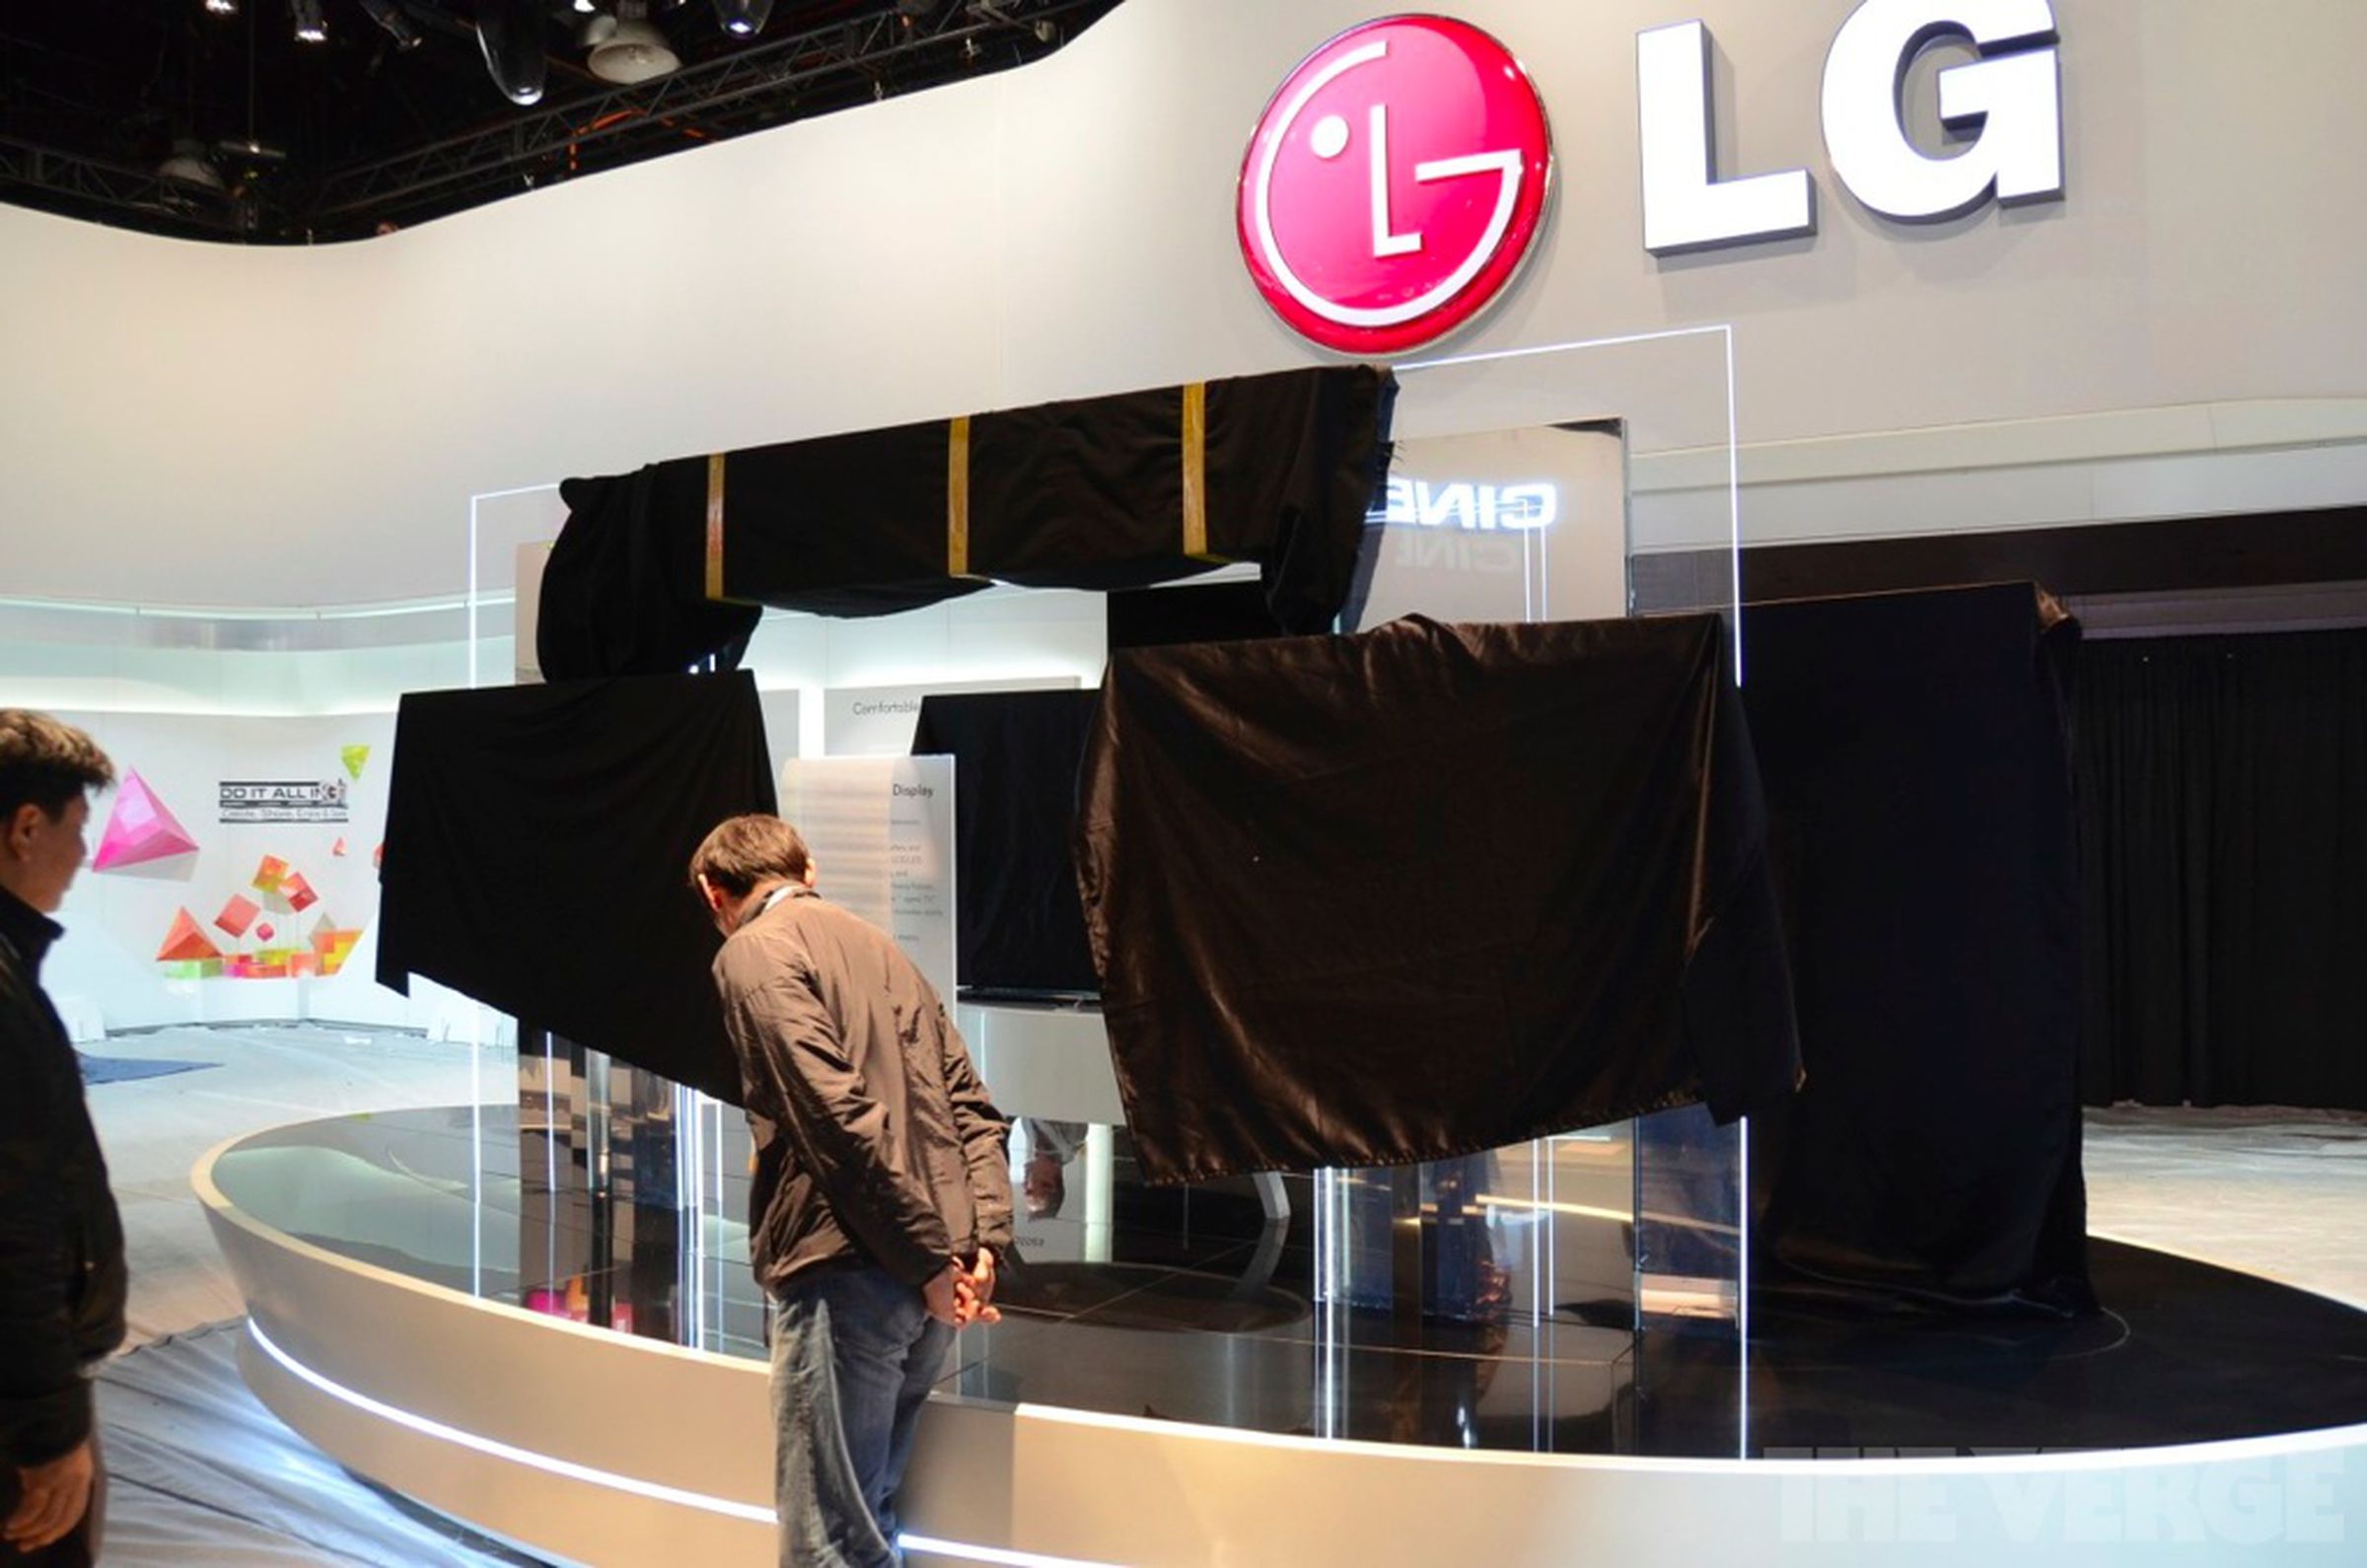 LG's 55-inch OLED TVs under wraps at CES 2012